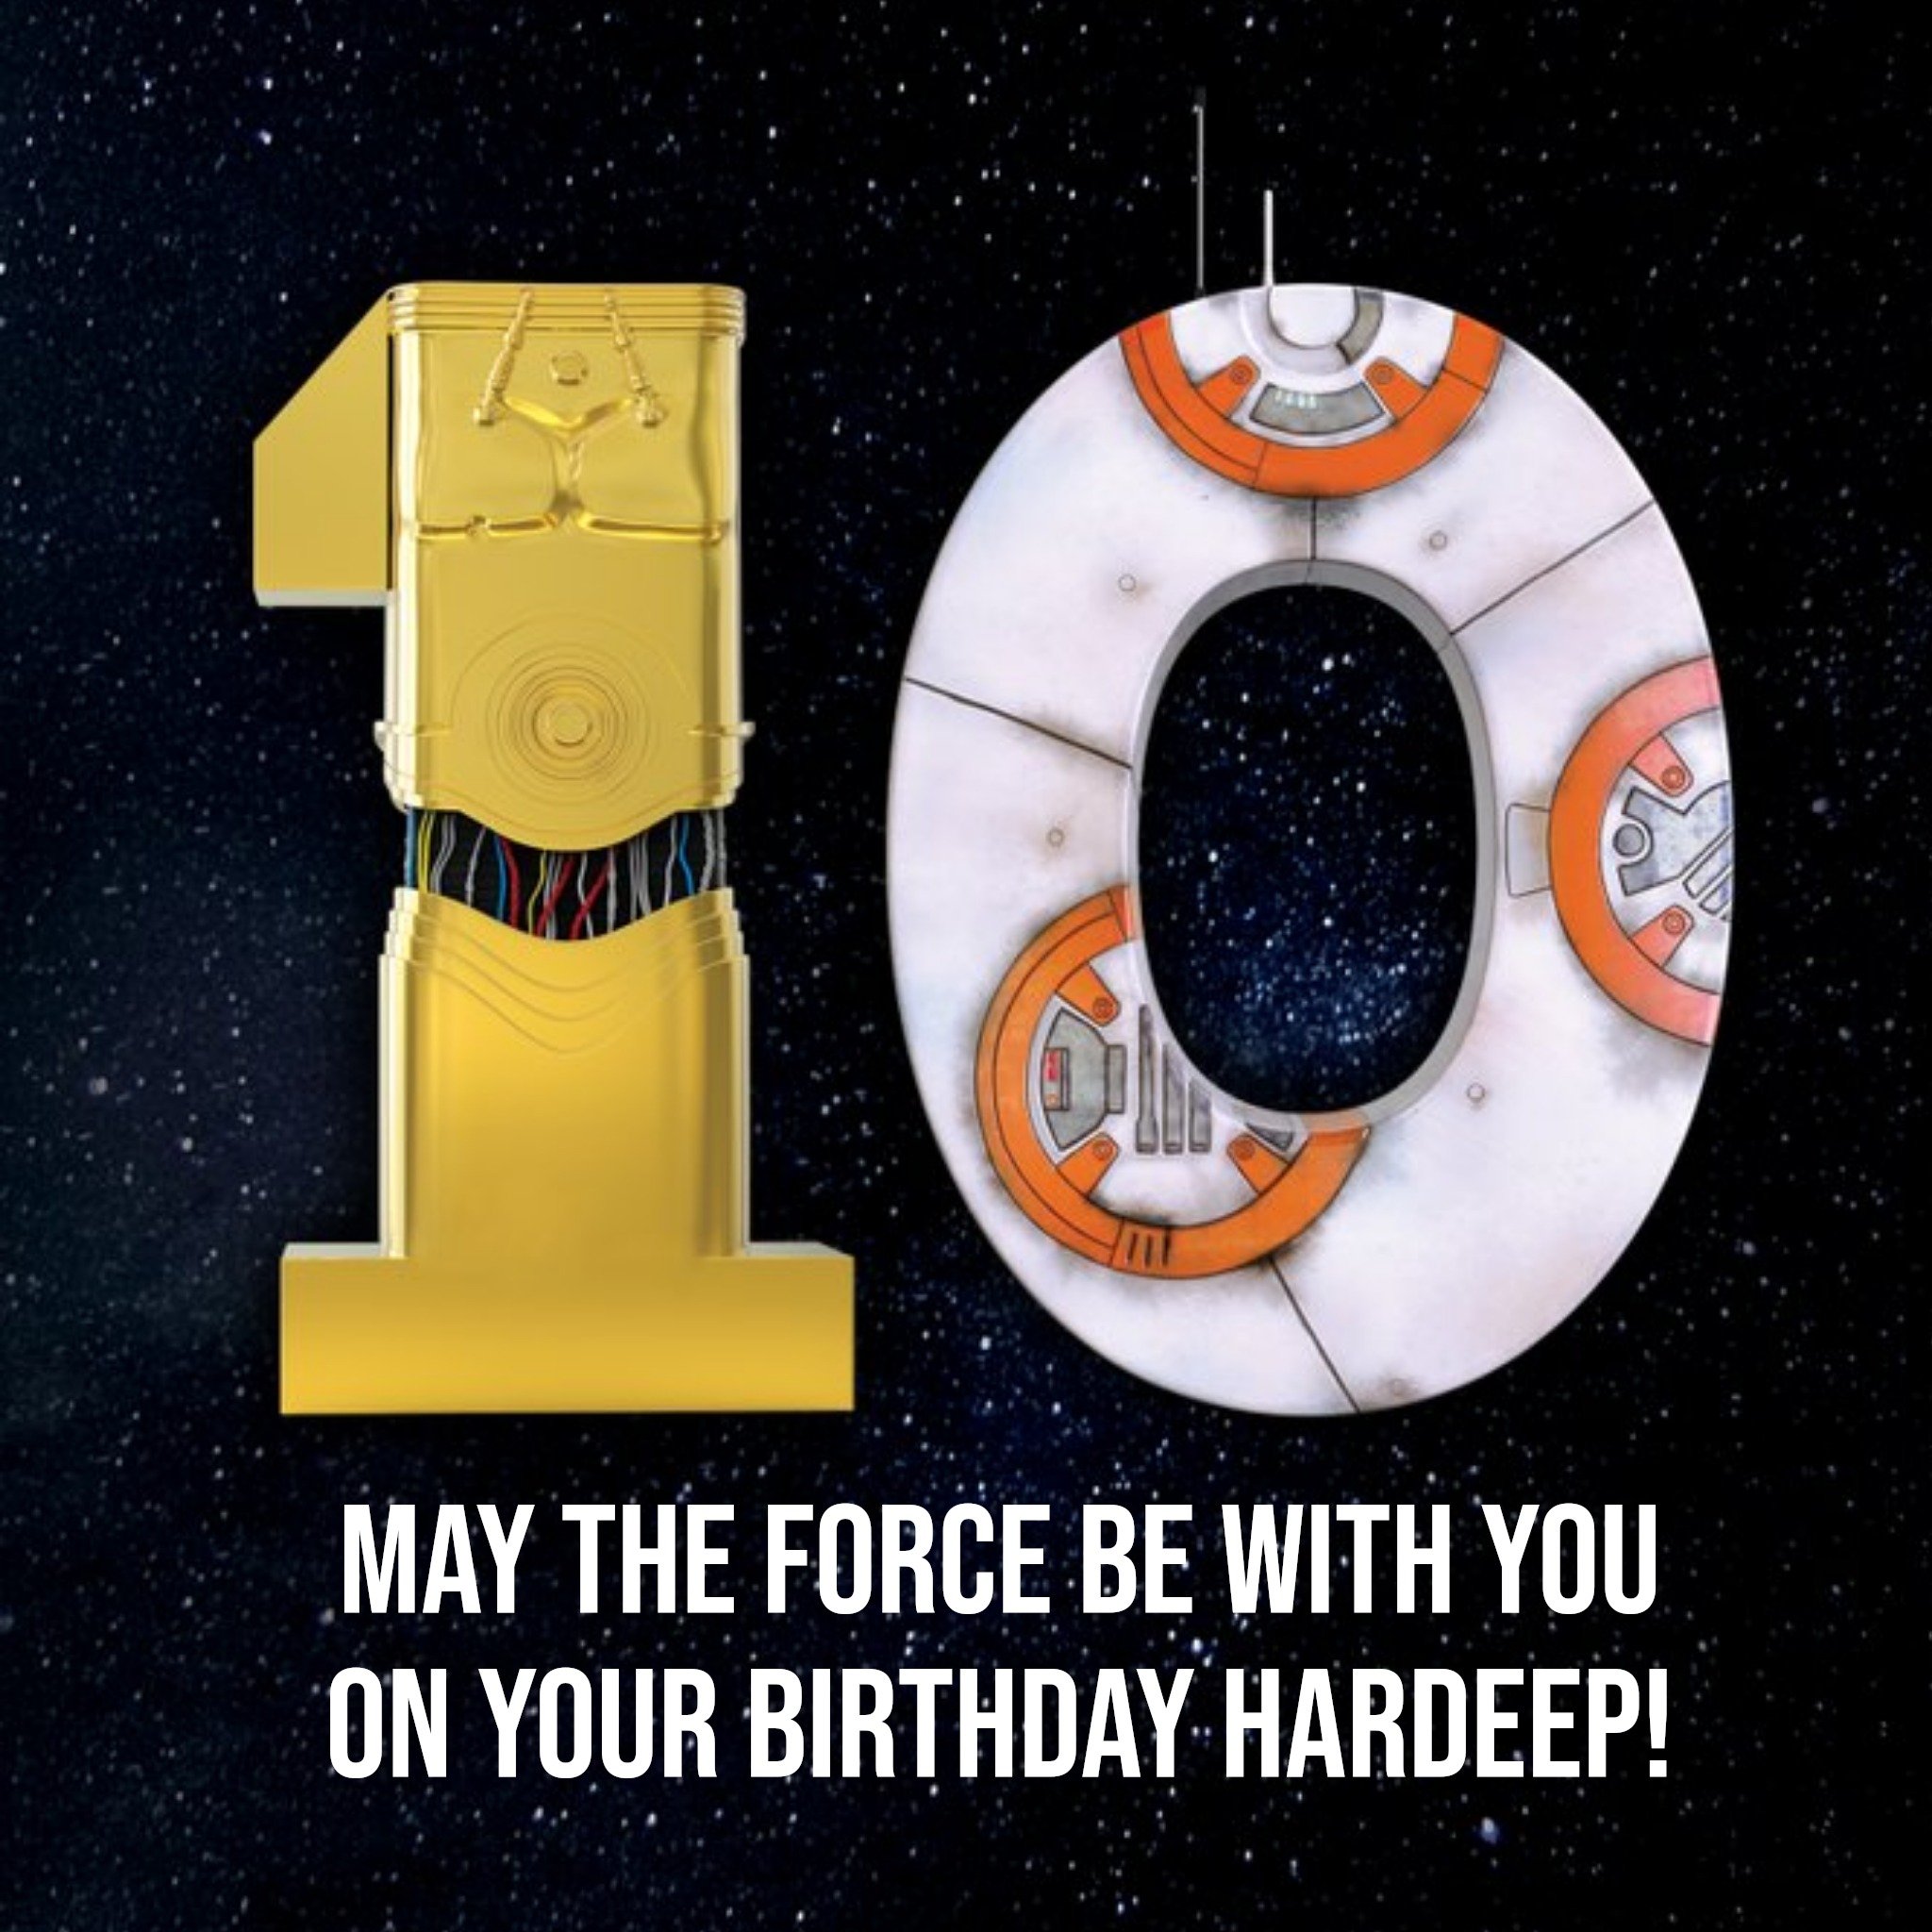 Disney Star Wars May the Force Be With You 10th Birthday Card, Square